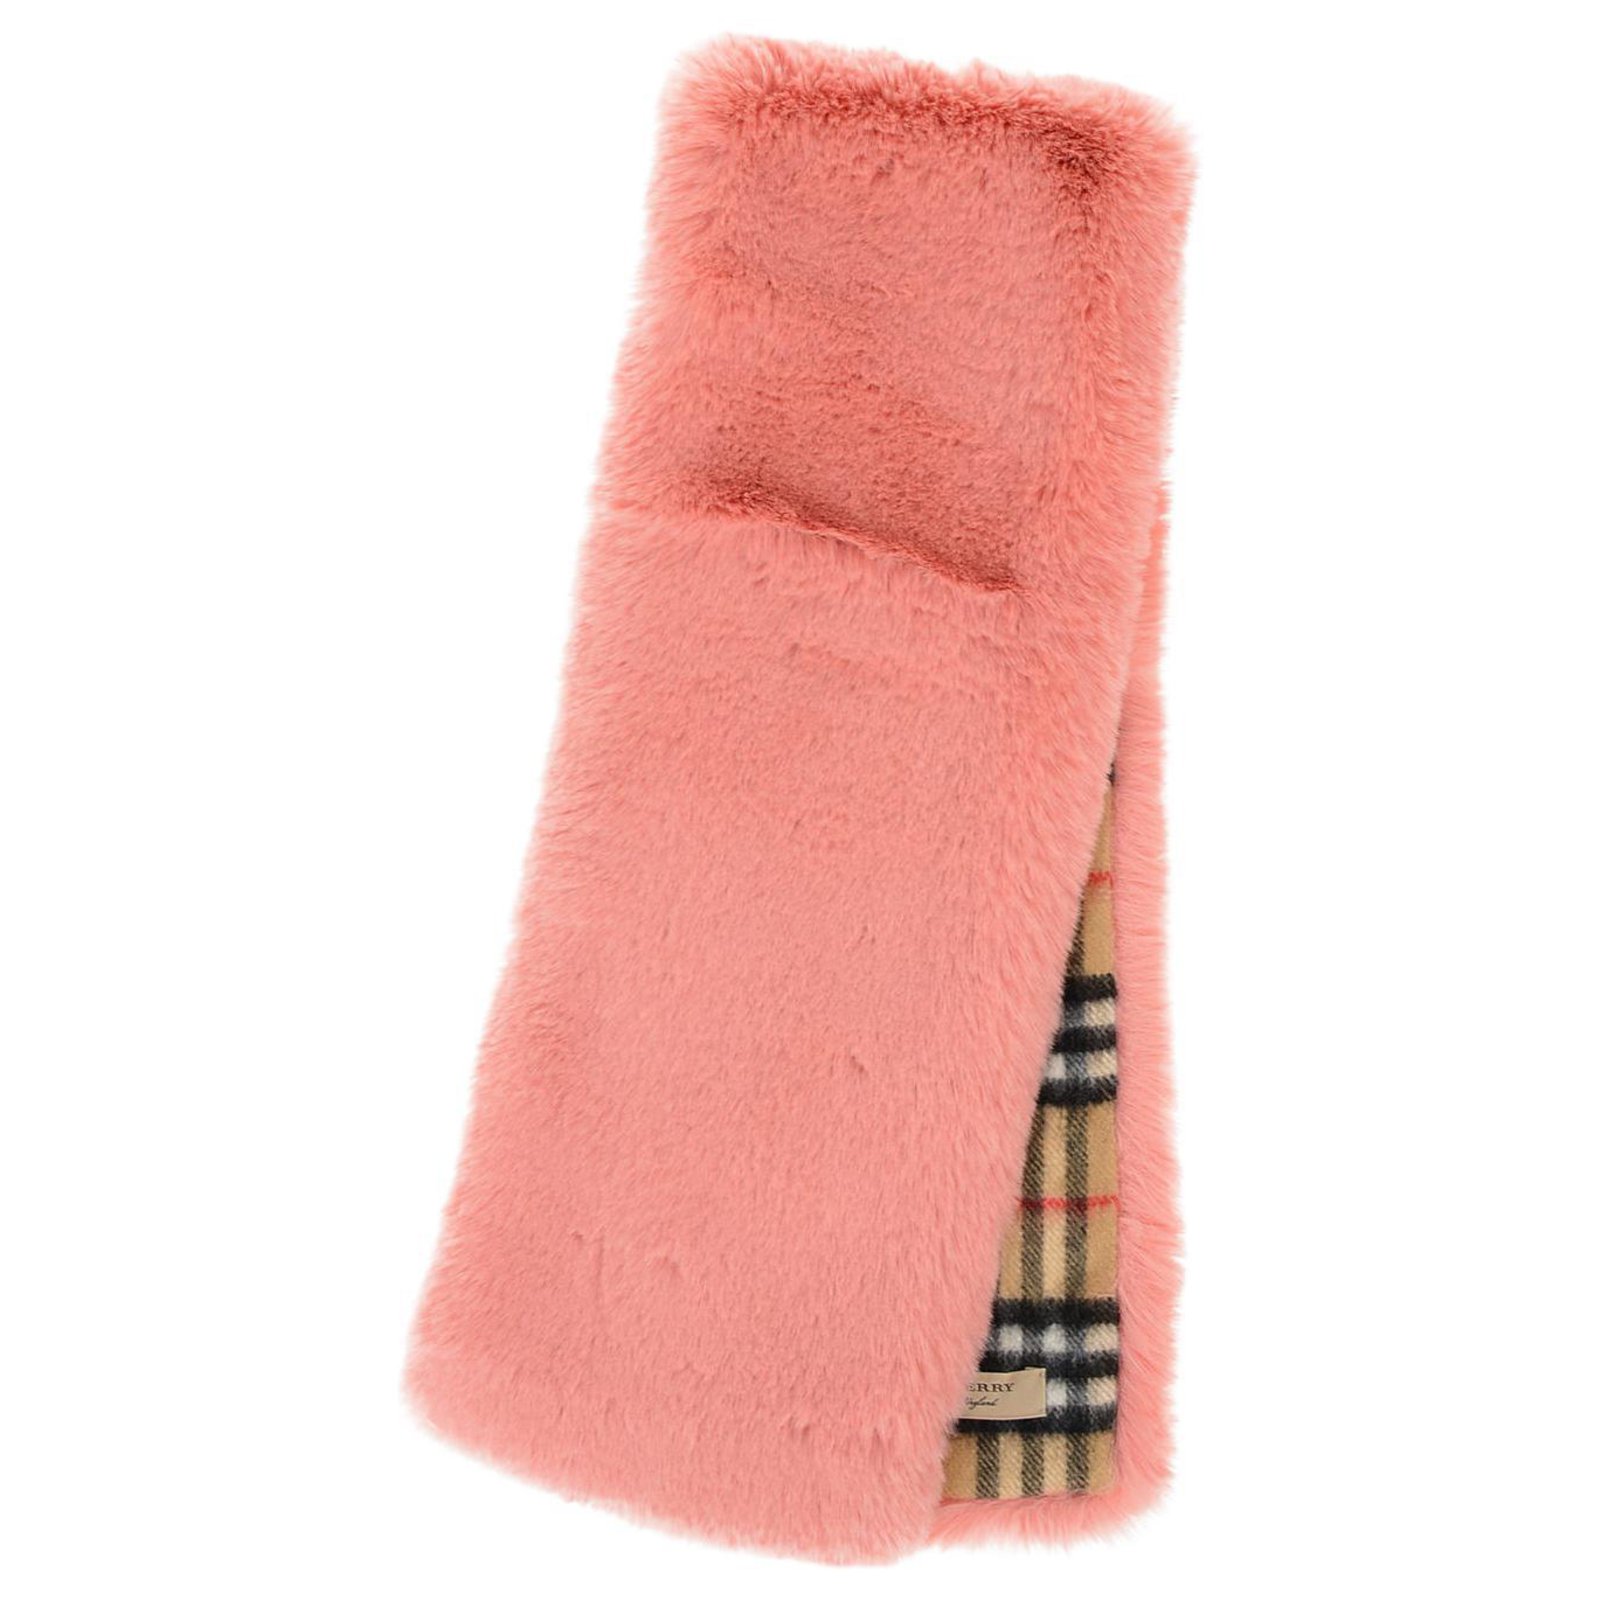 burberry scarf with fur